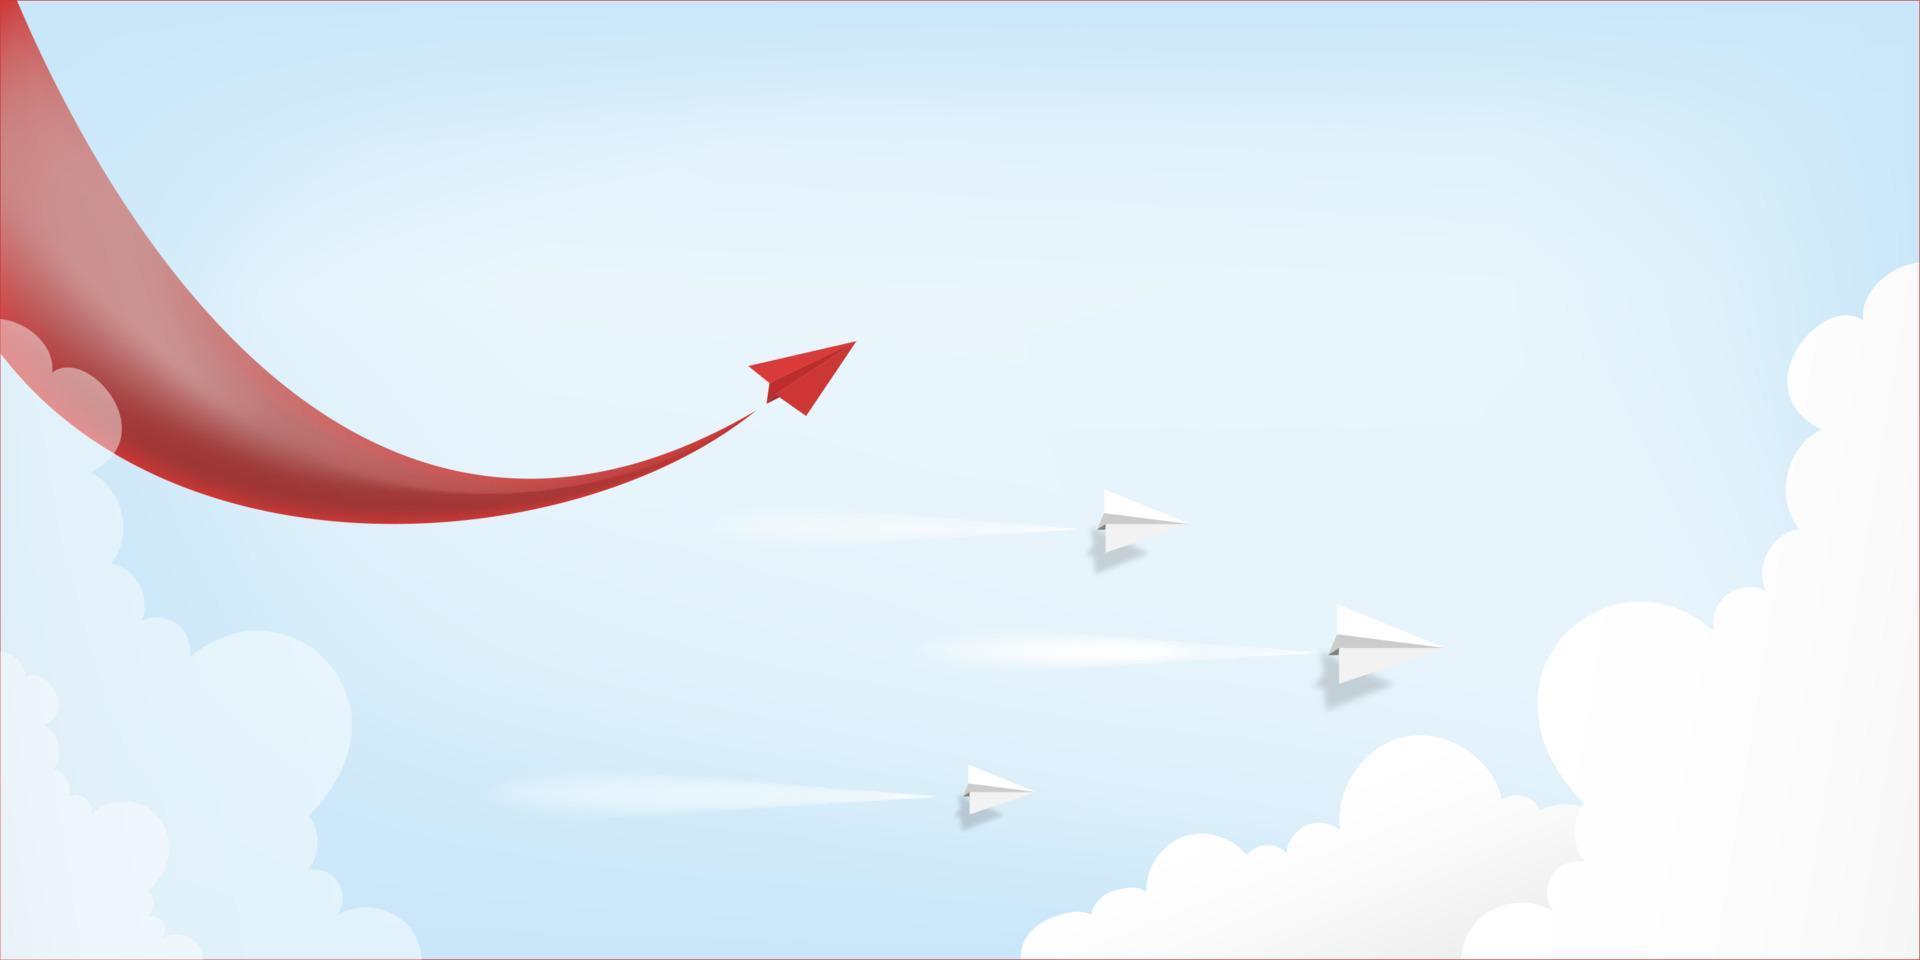 Red paper airplane leader flying on blue sky background. Creative concept idea of  business success and leadership in paper craft art style design .Vector illustration vector